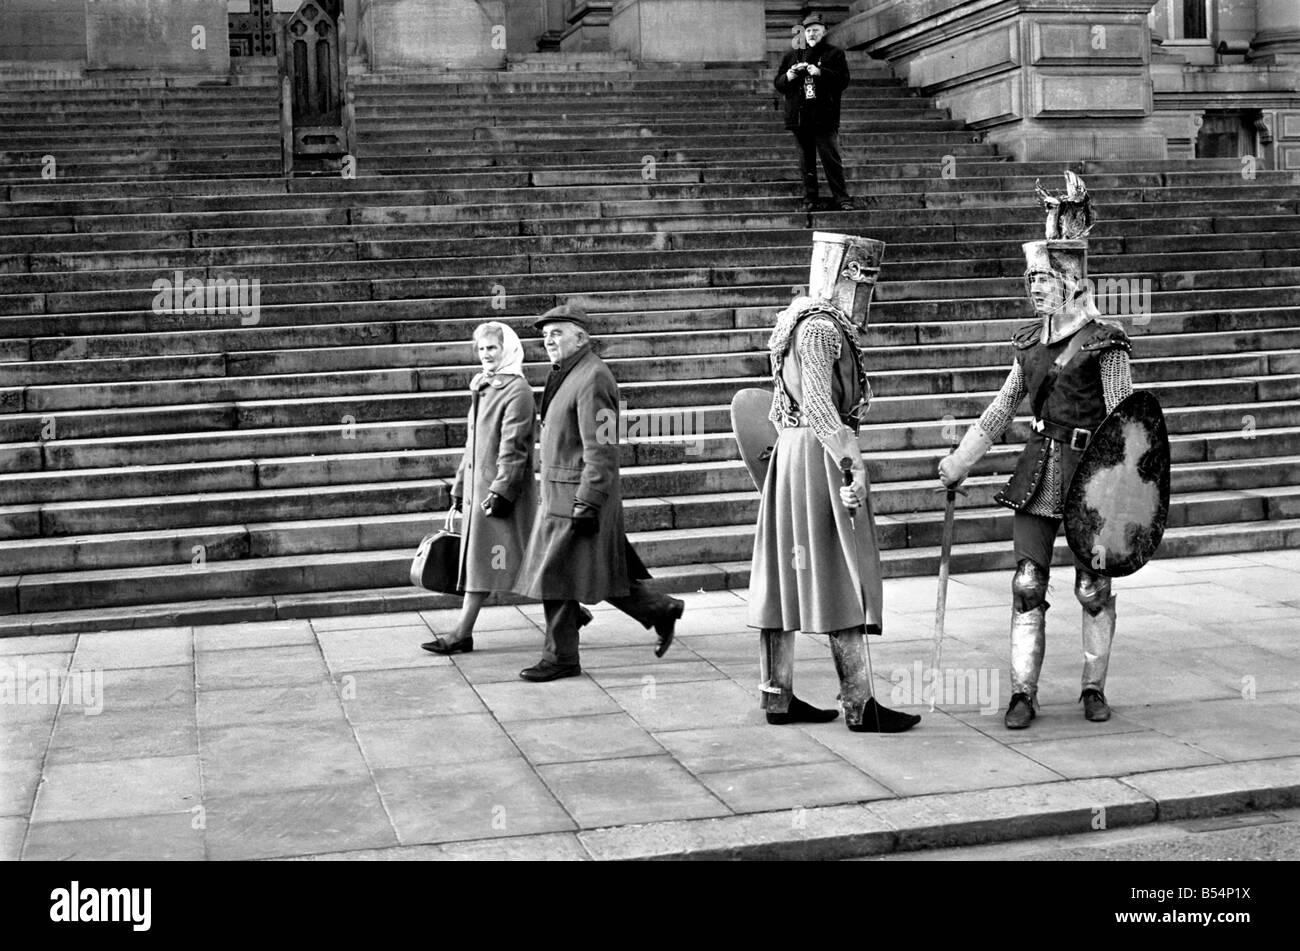 Shoppers hurry past the Town Hall steps as a couple of medieval knights are locked in combat in Bolton. The battle was being filmed by the Bolton Octagan Theatre Company. December 1969 Z11749-003 Stock Photo